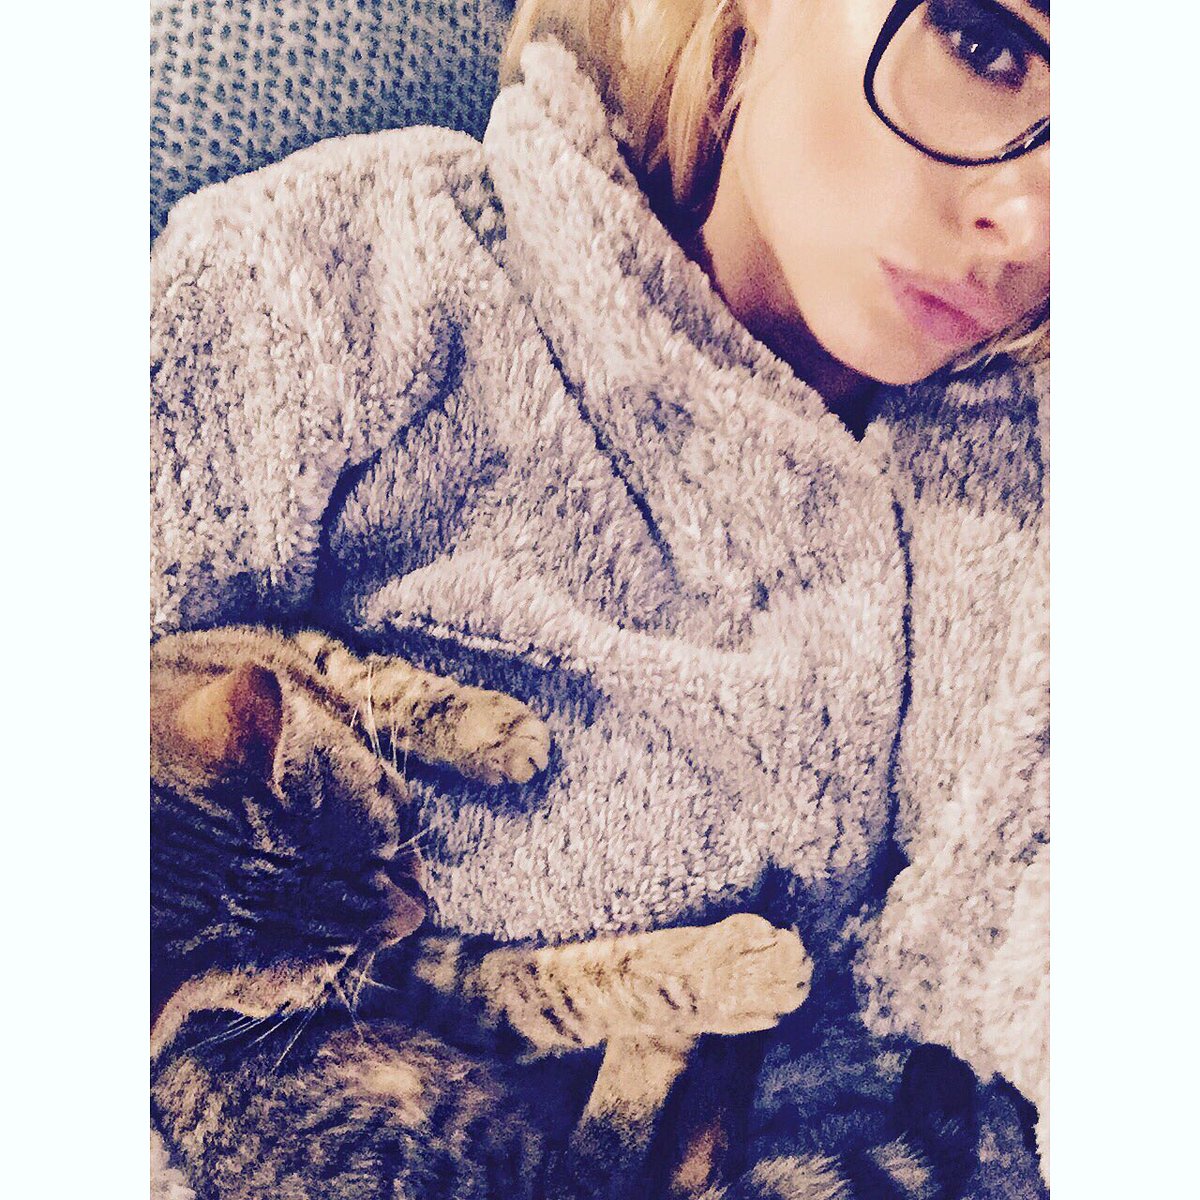 Cosy with Pawlene ????❤ https://t.co/oy2sdpMswZ